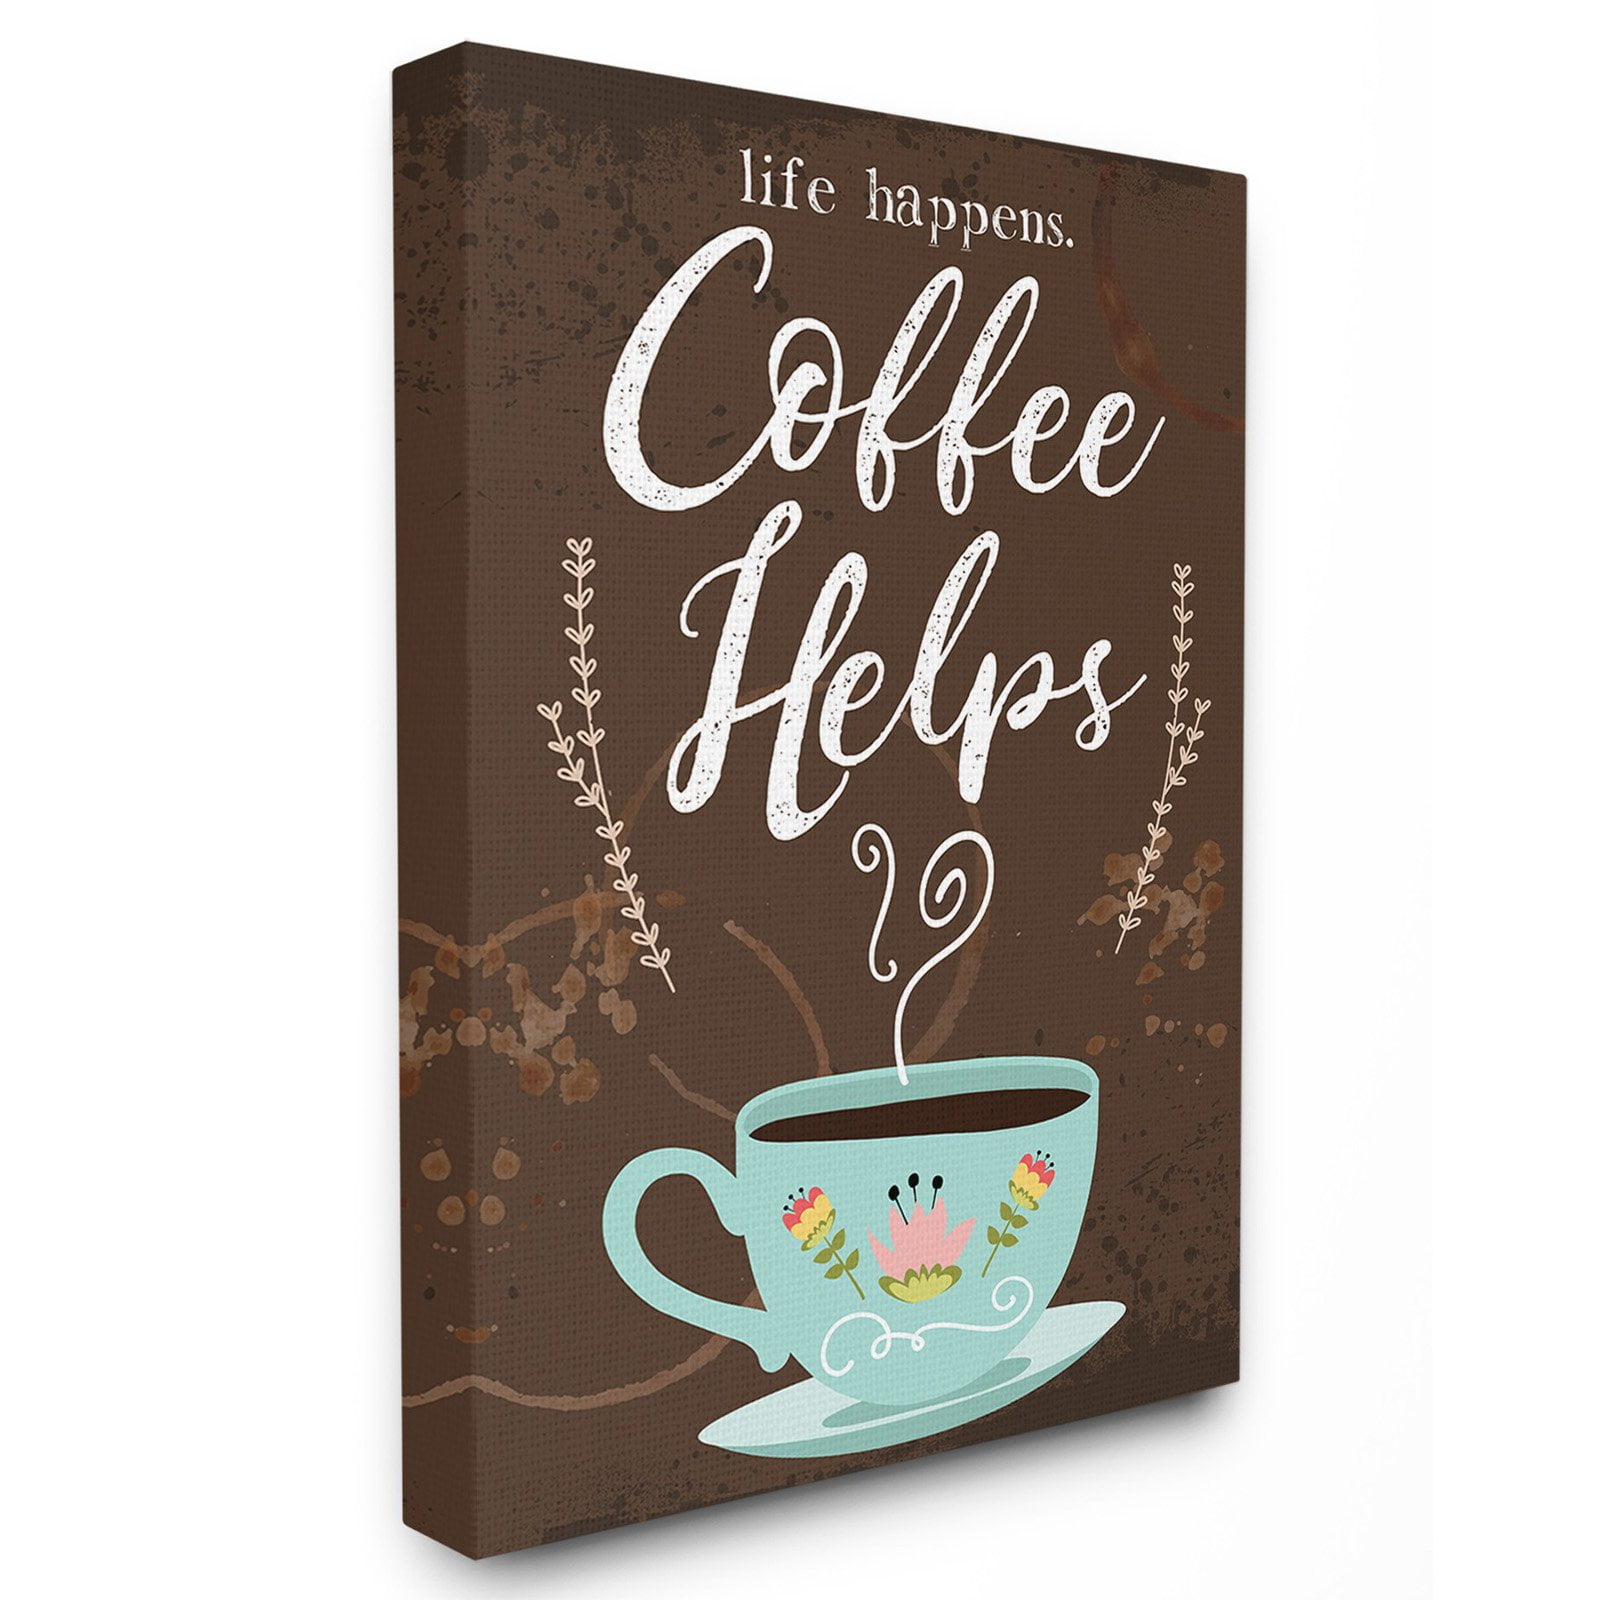 Helps Life Coffee Collection Home Stupell Wall Cup The Look Chalkboard Decor Art Happens